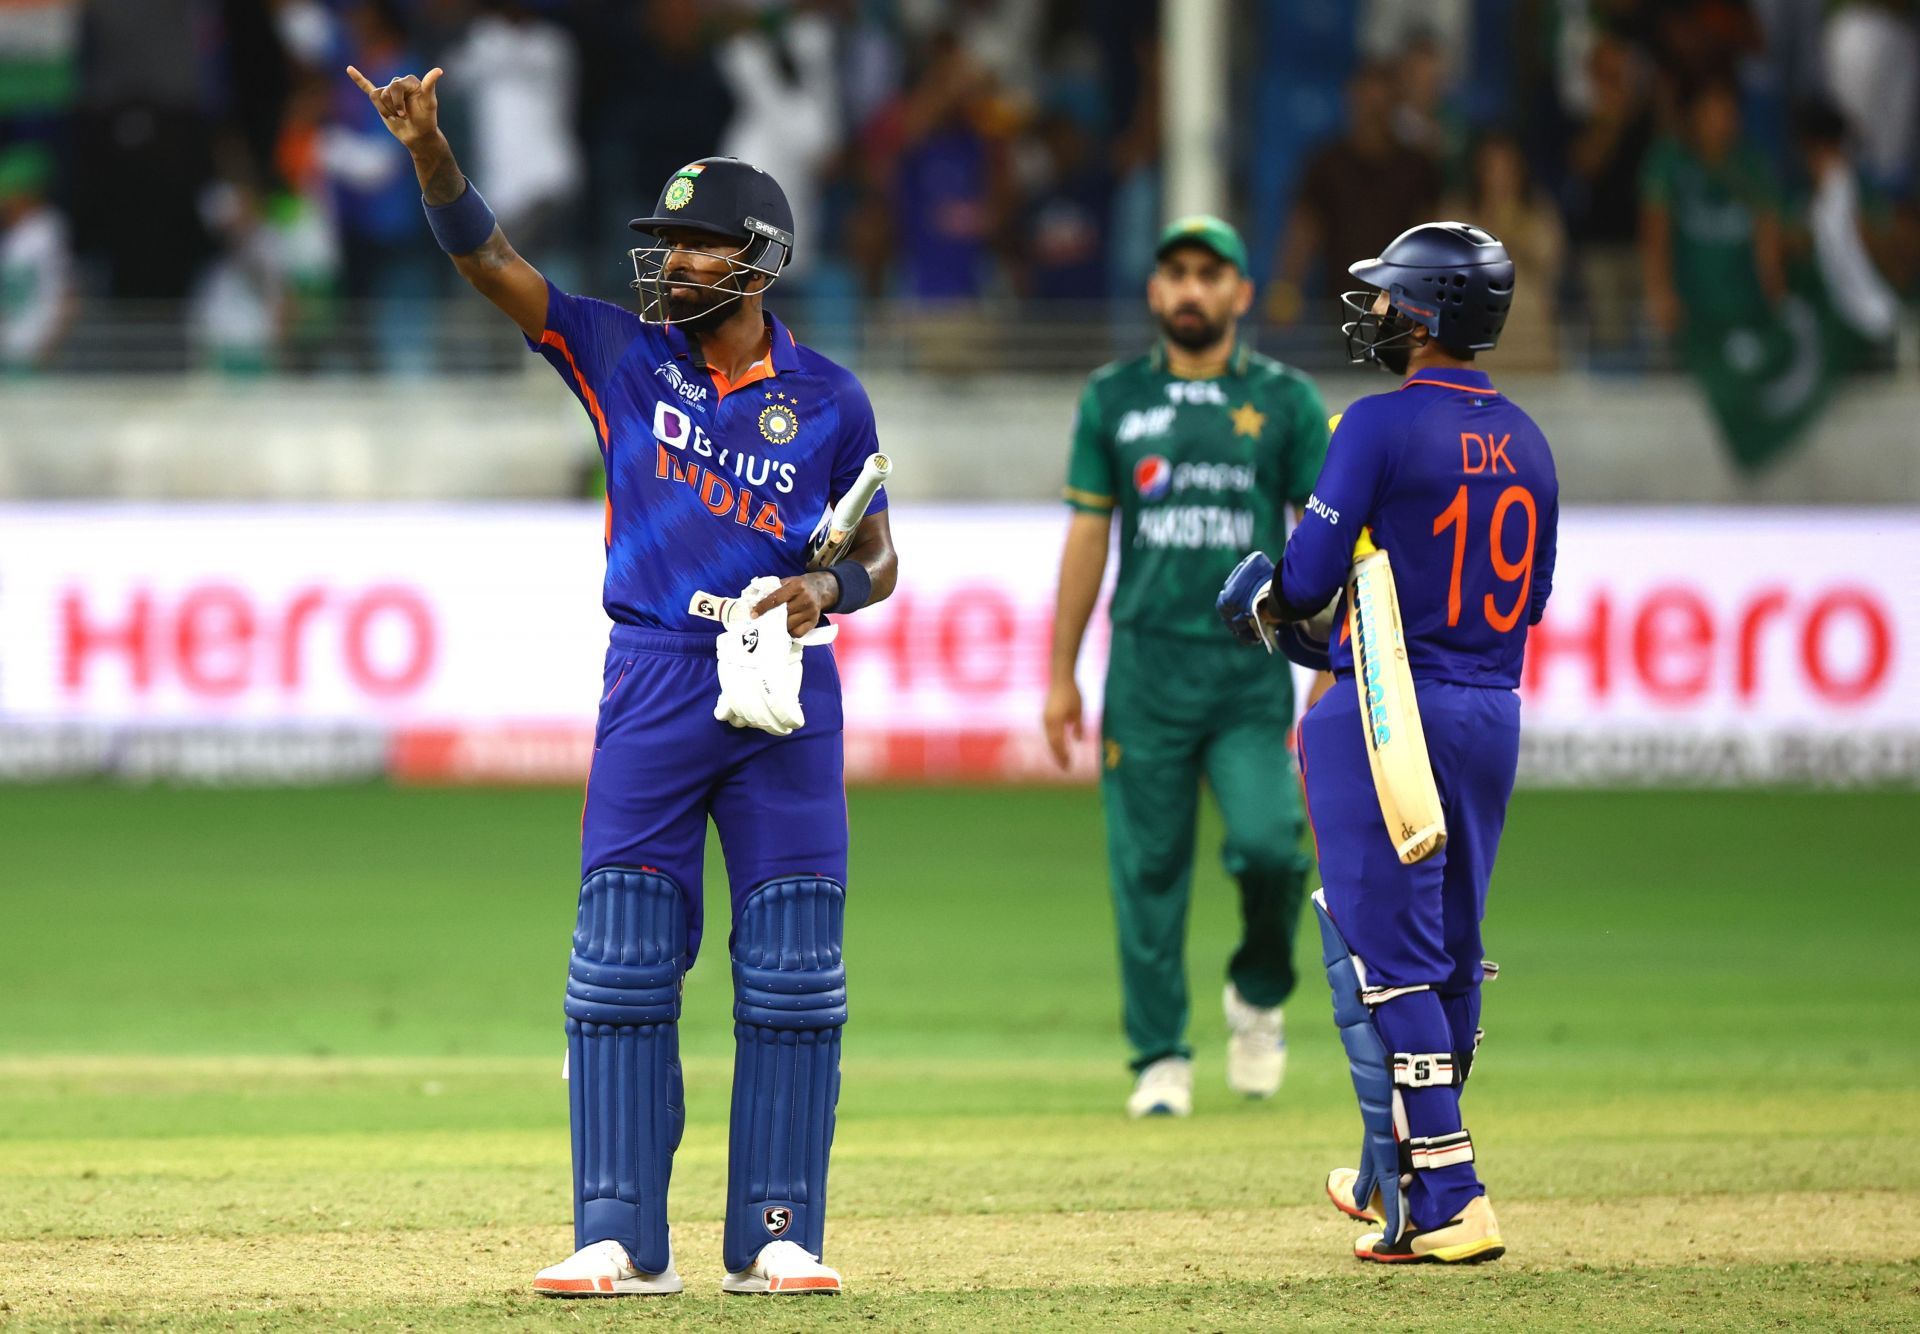 Hardik Pandya stayed calm and delivered India the win